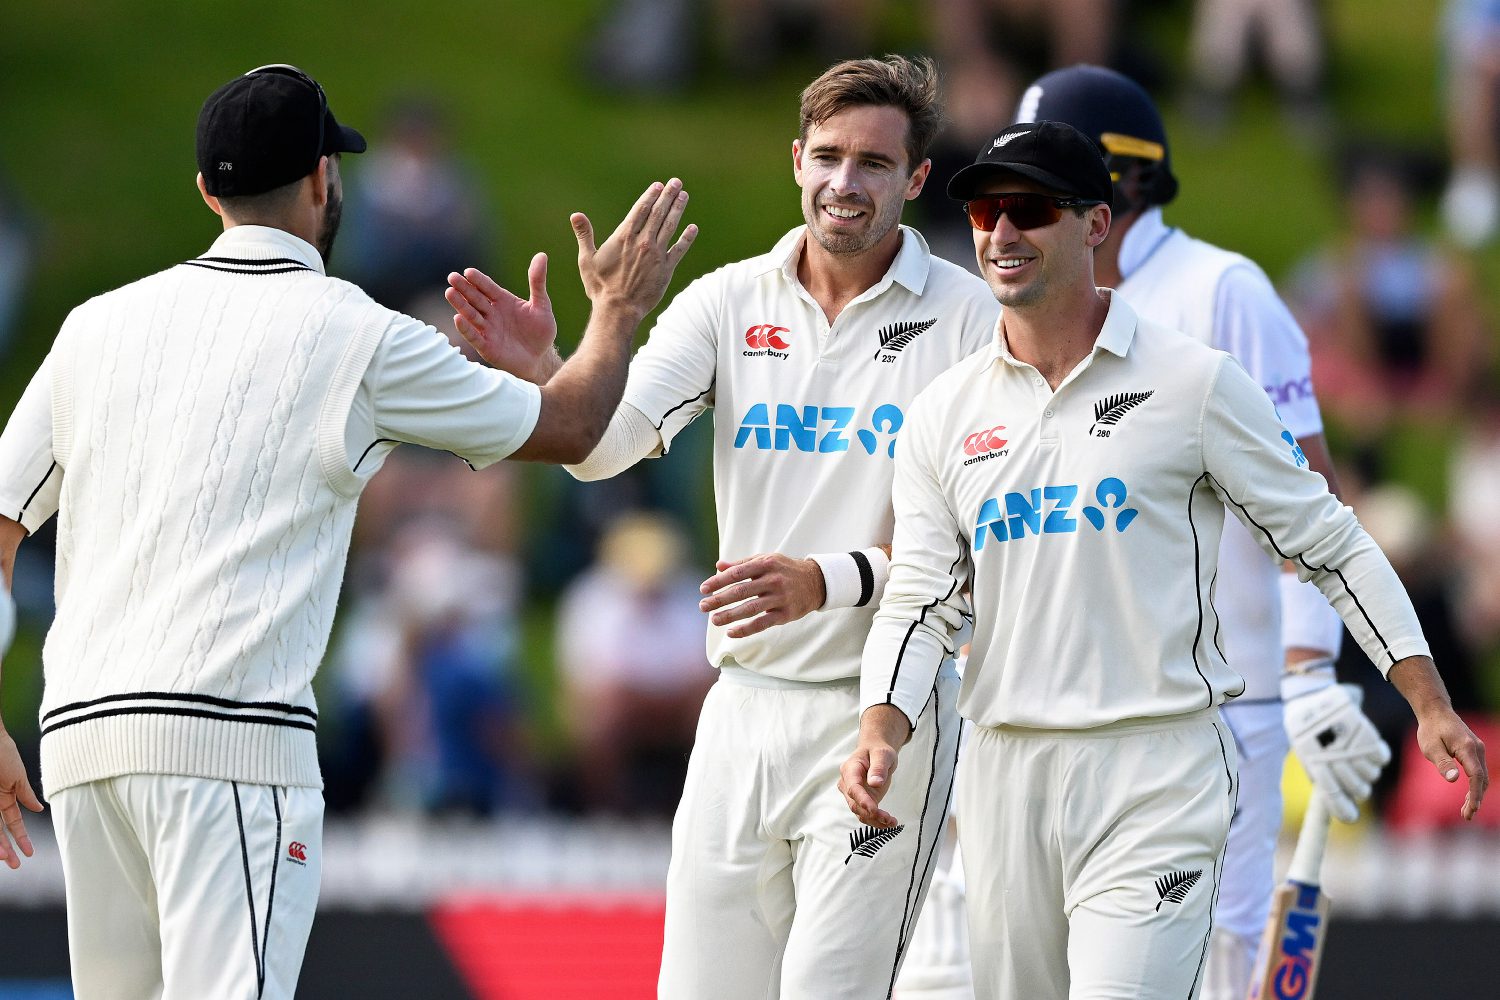 New Zealand beat England by 1 run in thrilling Test